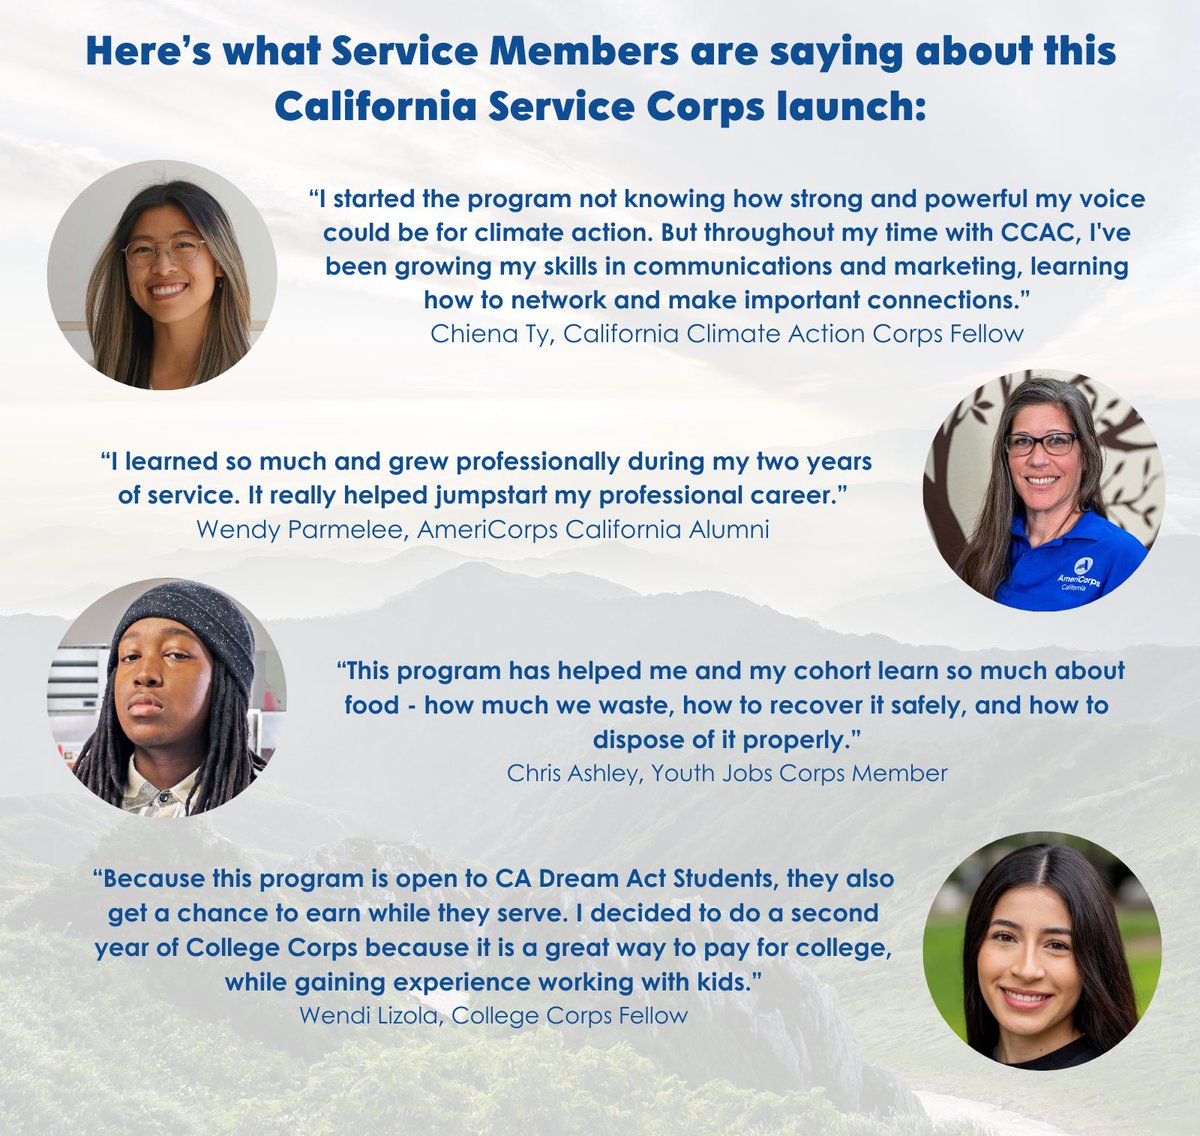 .@CalVolunteers is recruiting 10,000+ paid service corps members! Join today at 1:00 p.m. for a virtual panel to learn more about these opportunities, including the day-to-day experience, benefits, impact of service & more. #CaliforniansForAll 

Register: bit.ly/CalServiceCorps